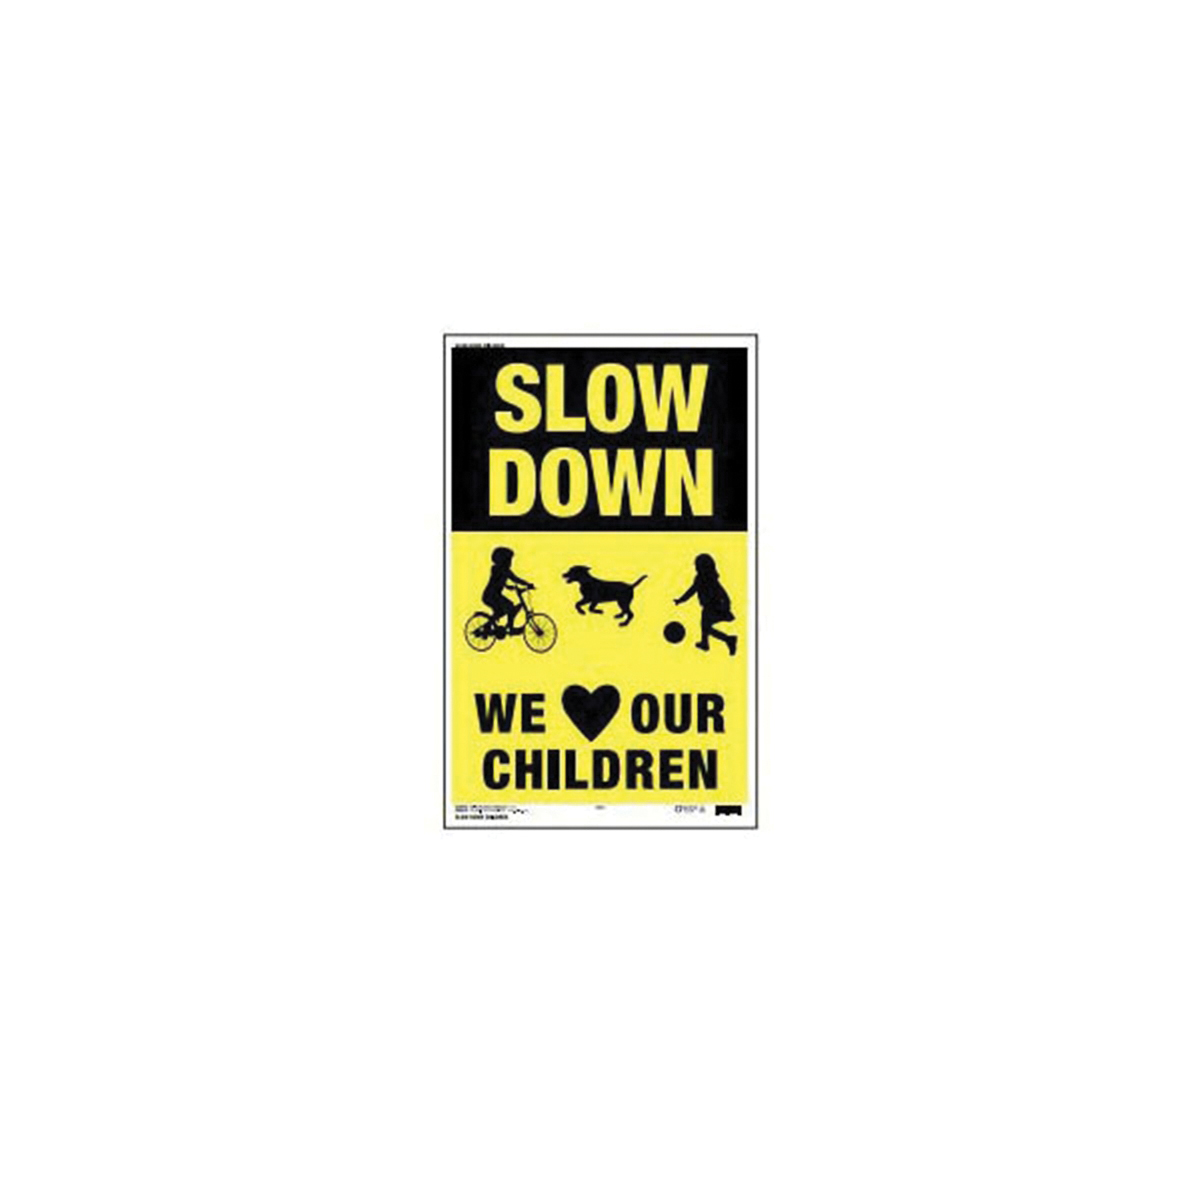 25001 Medium Size Safety Sign, SLOW DOWN WE LOVE OUR CHILDREN, Plastic, 12 x 18 in Dimensions